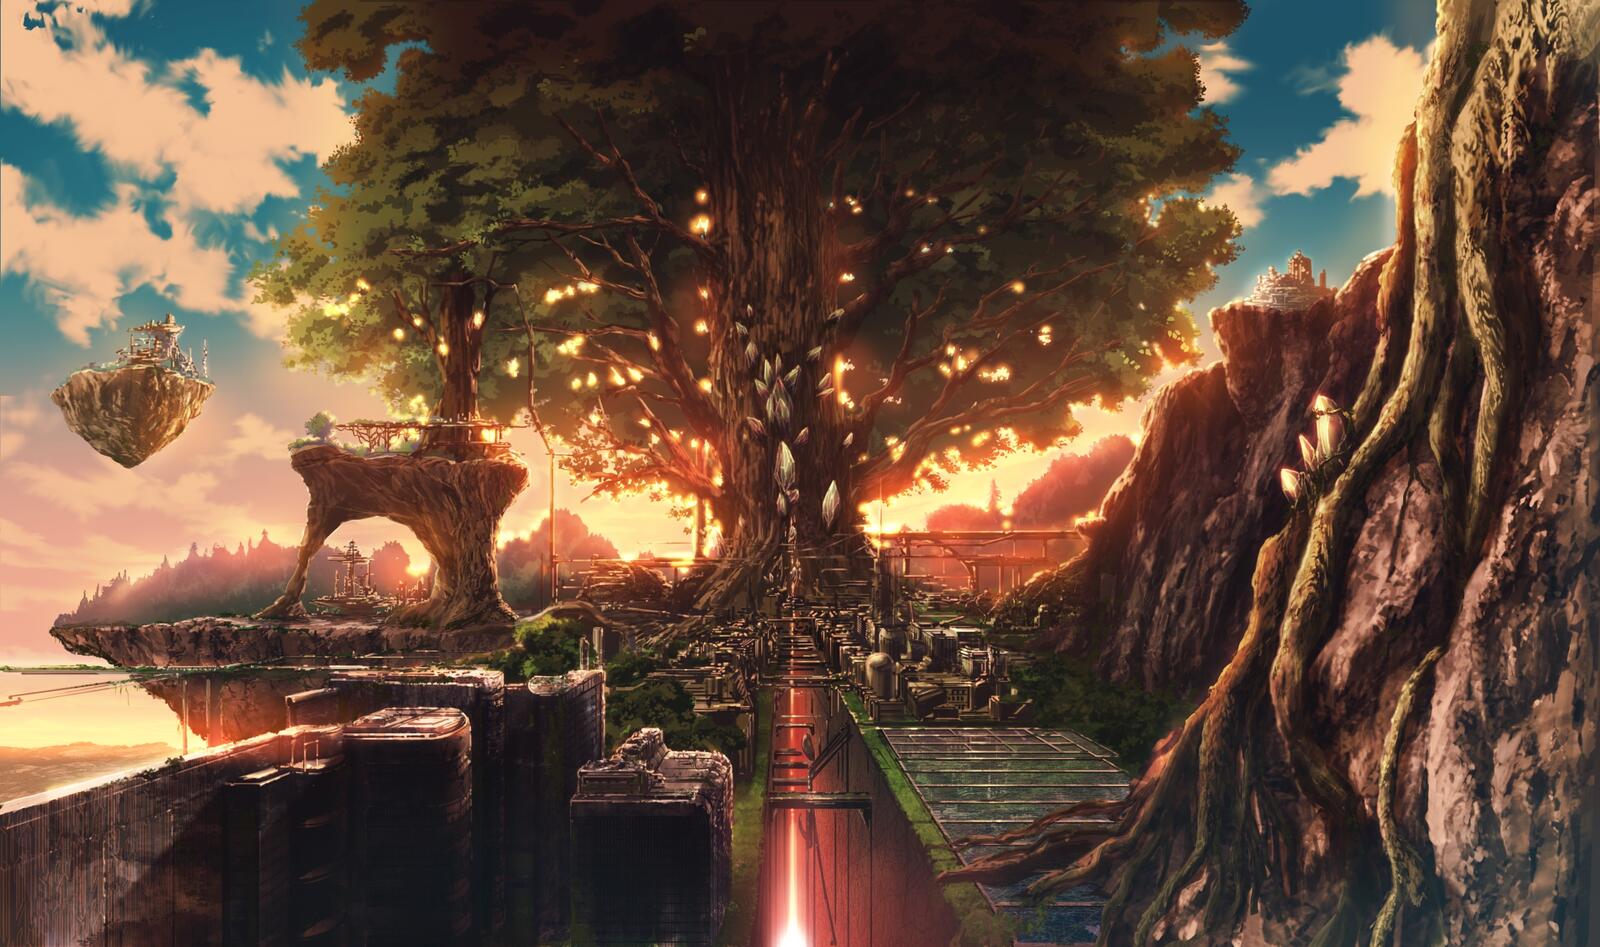 Wallpapers giant tree anime fantasy world floating islands on the desktop